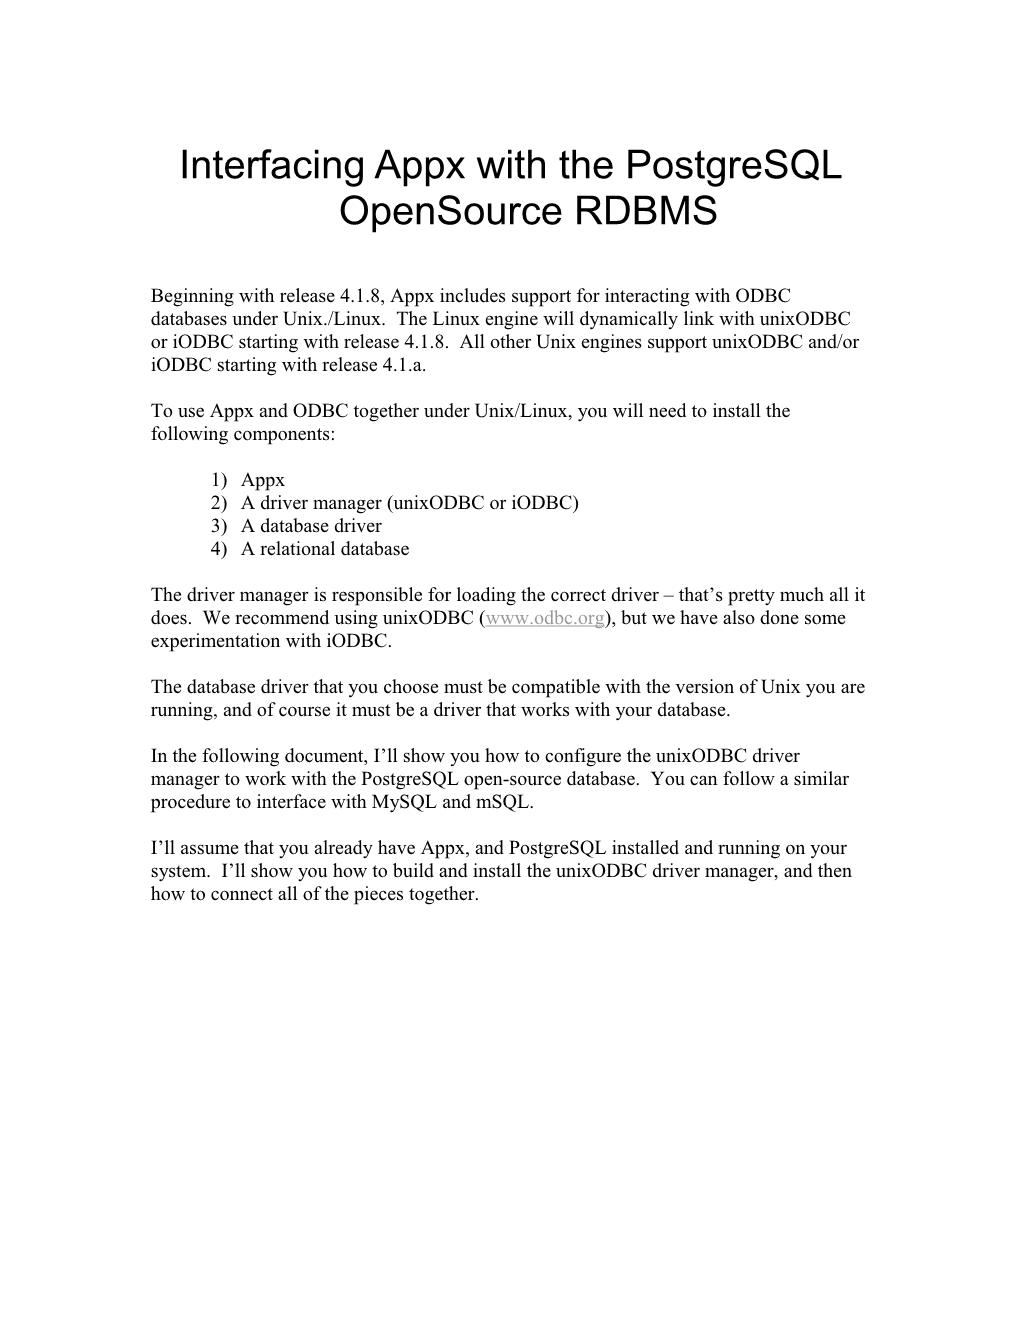 Interfacing Appx with the Postgresql Opensource RDBMS